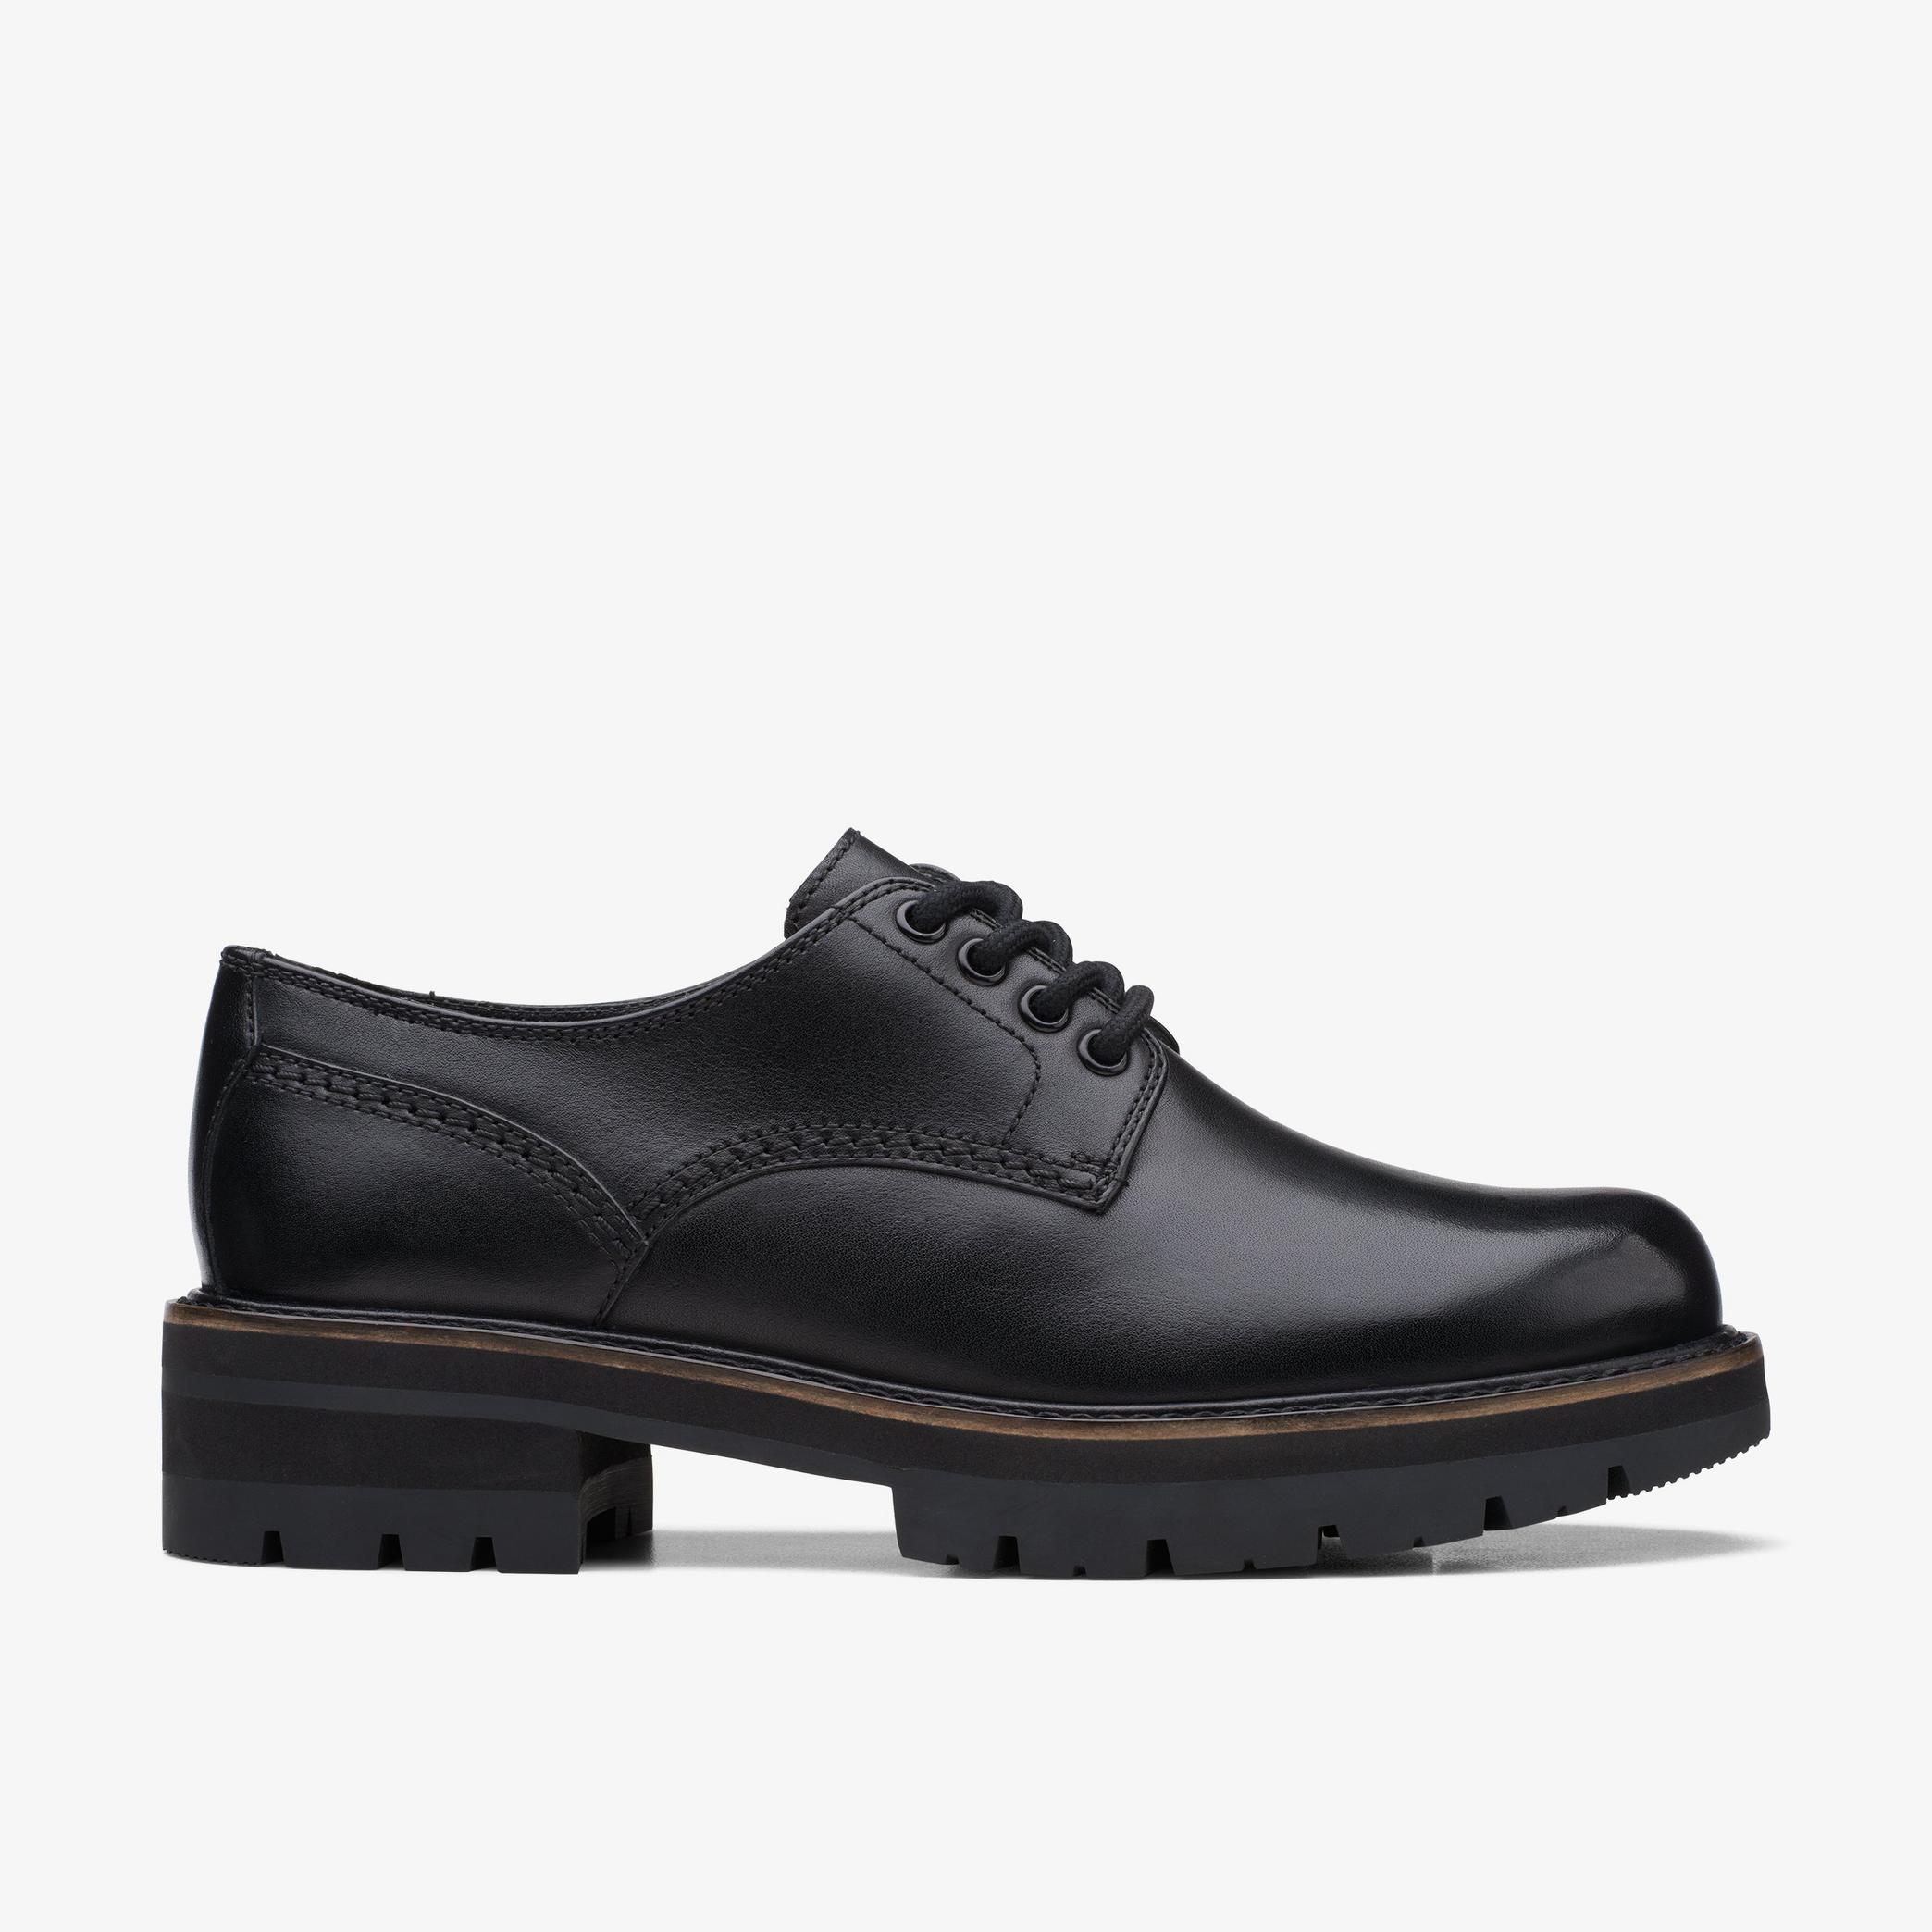 Orianna Derby Black Oxford Shoes, view 1 of 7